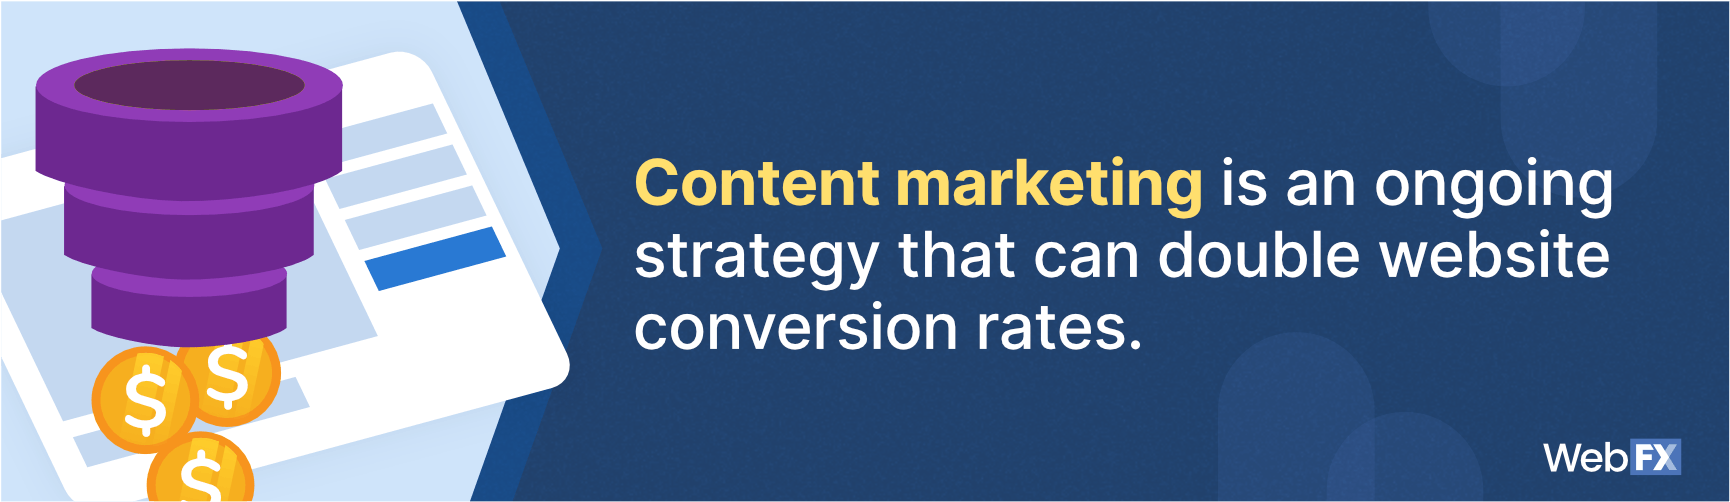 content marketing is an ongoing strategy